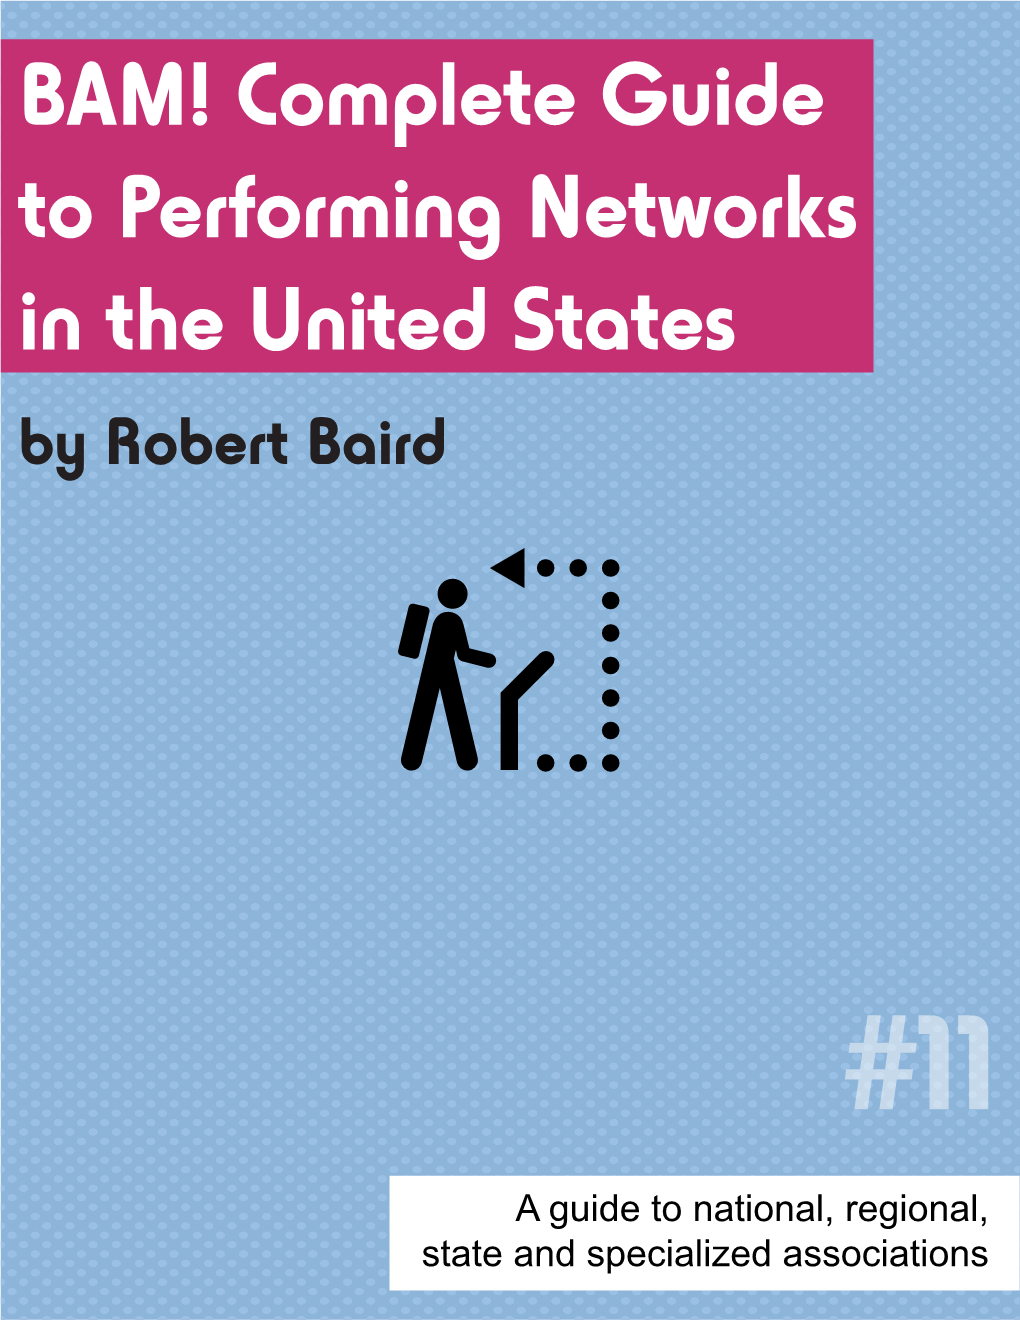 BAM! Complete Guide to Performing Networks in the United States by Robert Baird